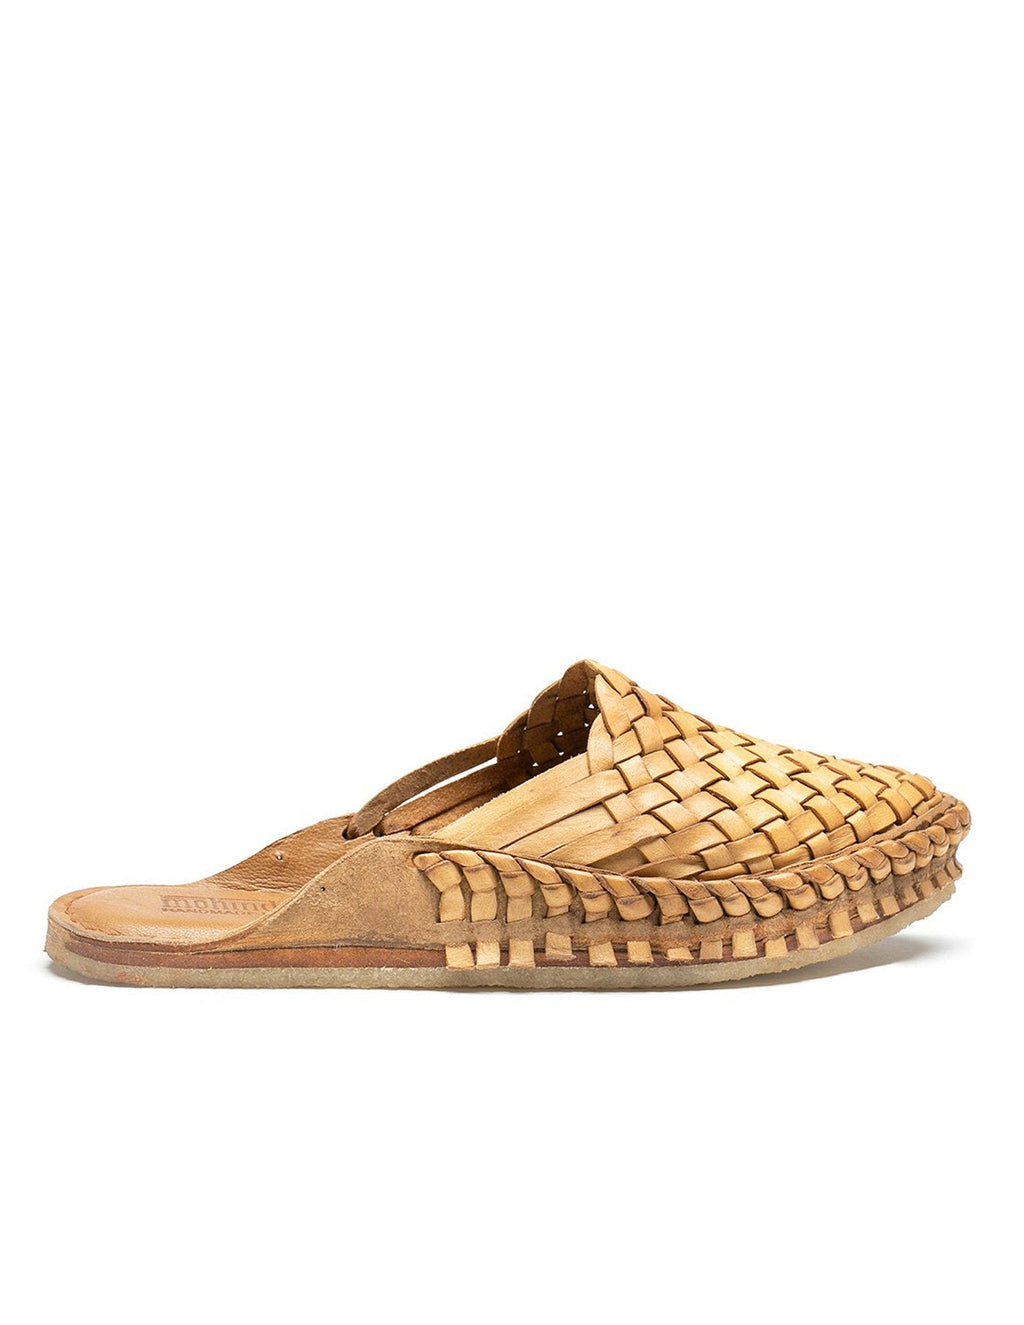 Woven Slide - Honey With No Stripes